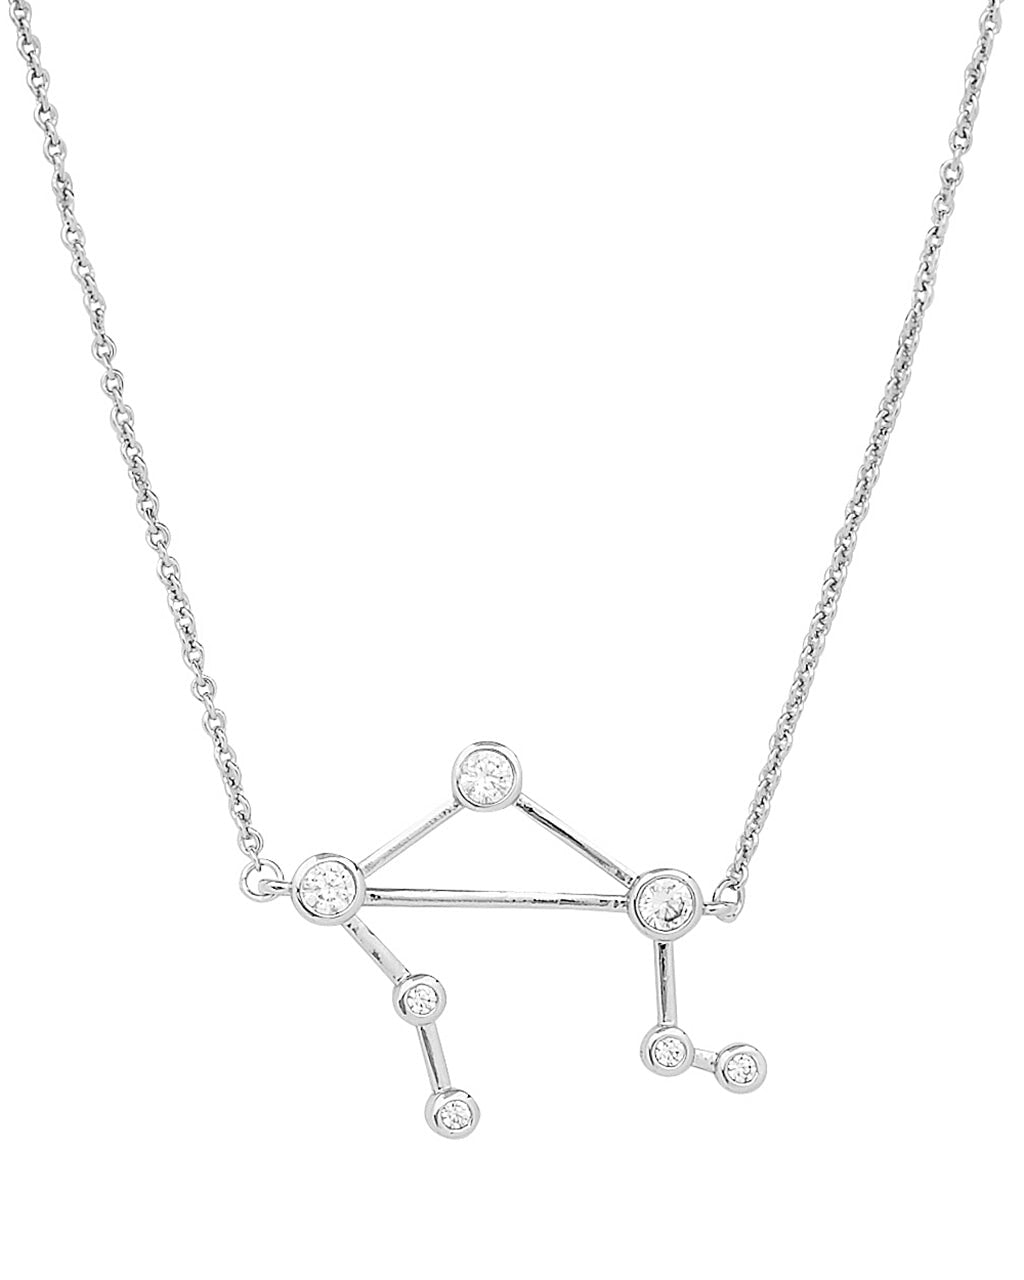 'When Stars Align' Constellation Necklace Necklace Sterling Forever Silver Libra (Sept 23 - Oct 22) 